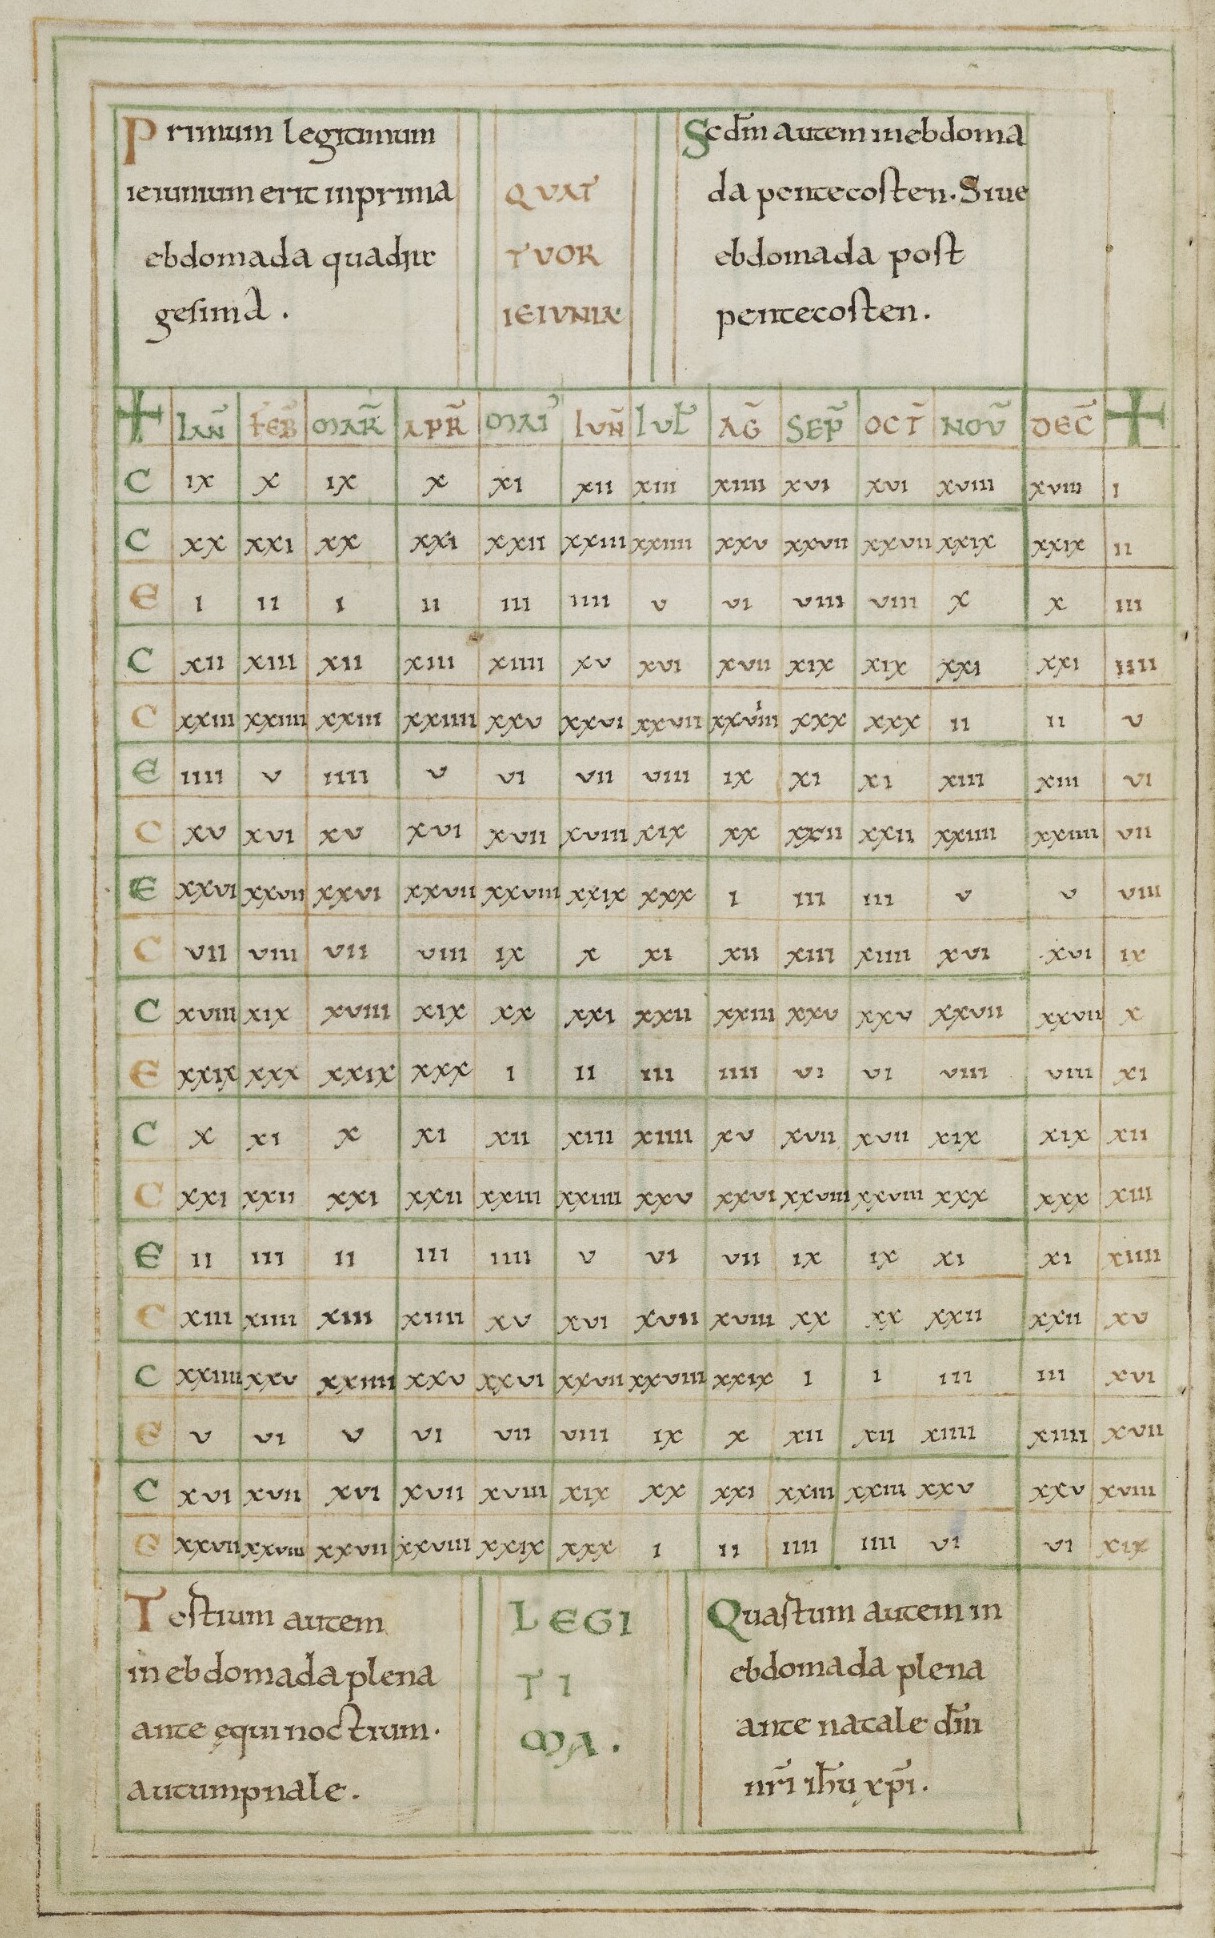 This table of a 19-year lunar cycle, which showing the age of the moon of the first day of each month, is separated into a rectangular grid filling up the manuscript folio. Around the grid are four boxes with text written in Latin, describing the Ember Days throughout the year. The scribe has used green and red ink to draw the lines of the grid. 